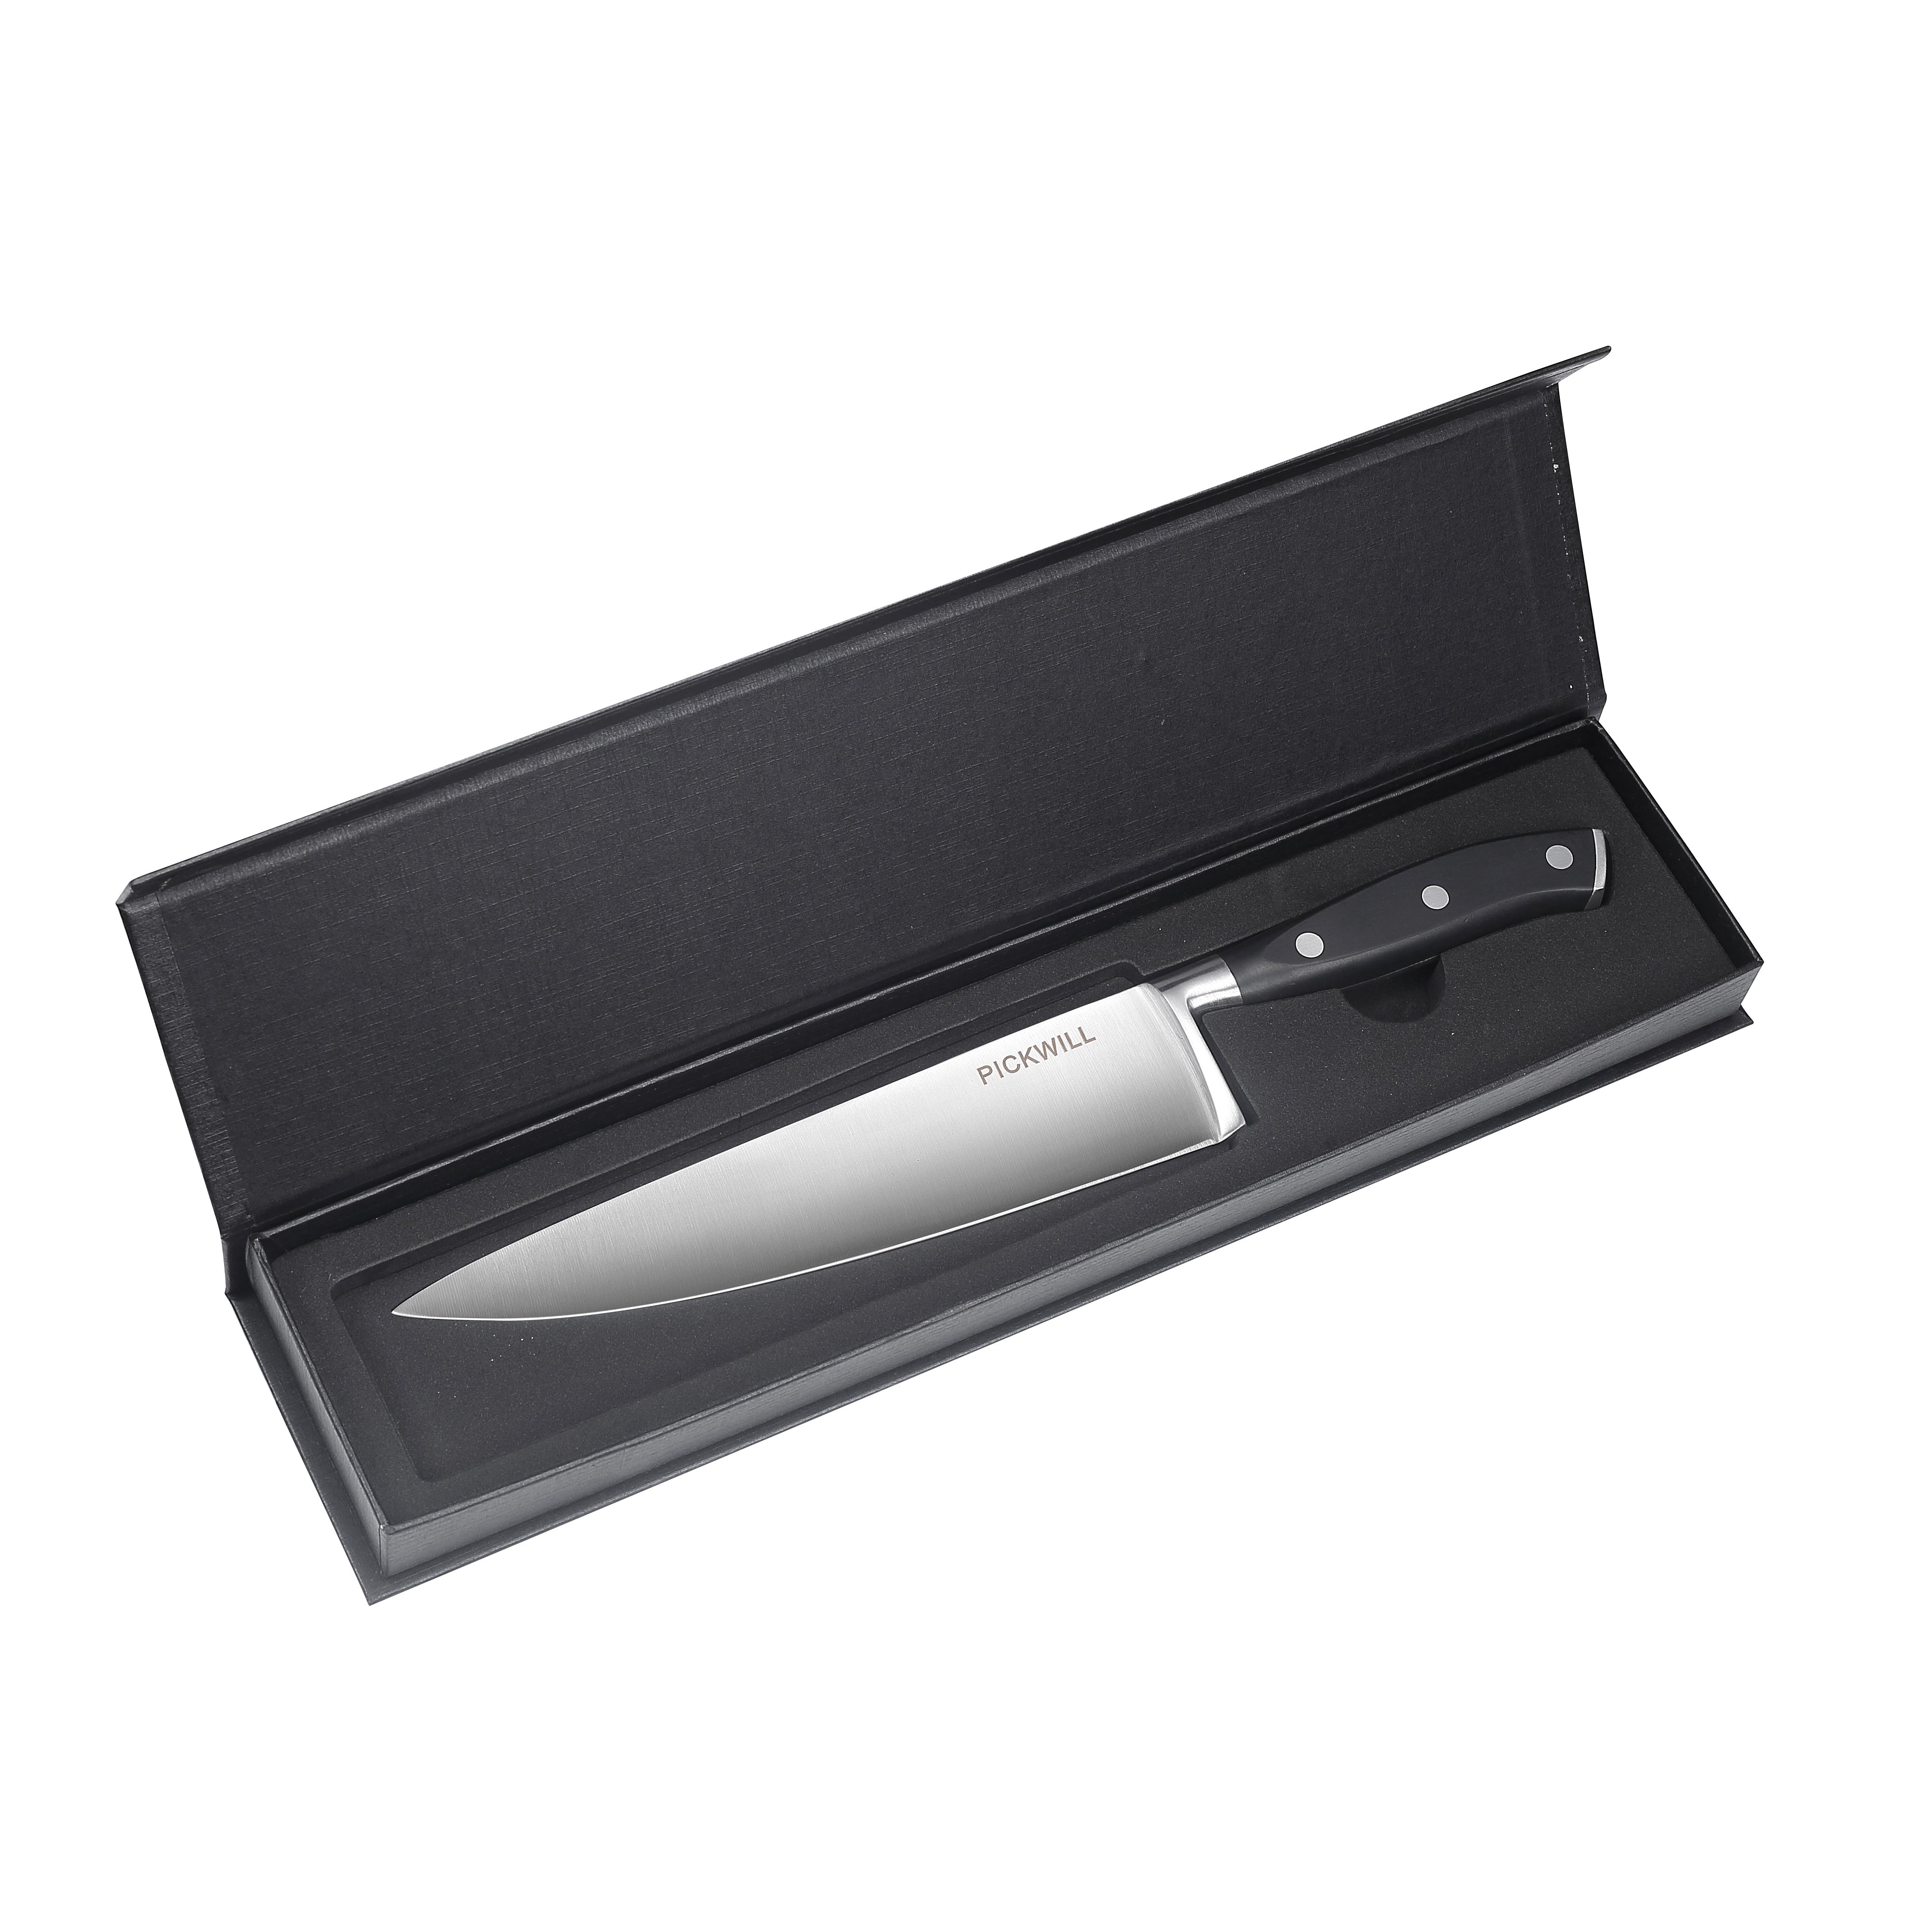  PICKWILL Chef Knife, 8 Inch Professional Kitchen